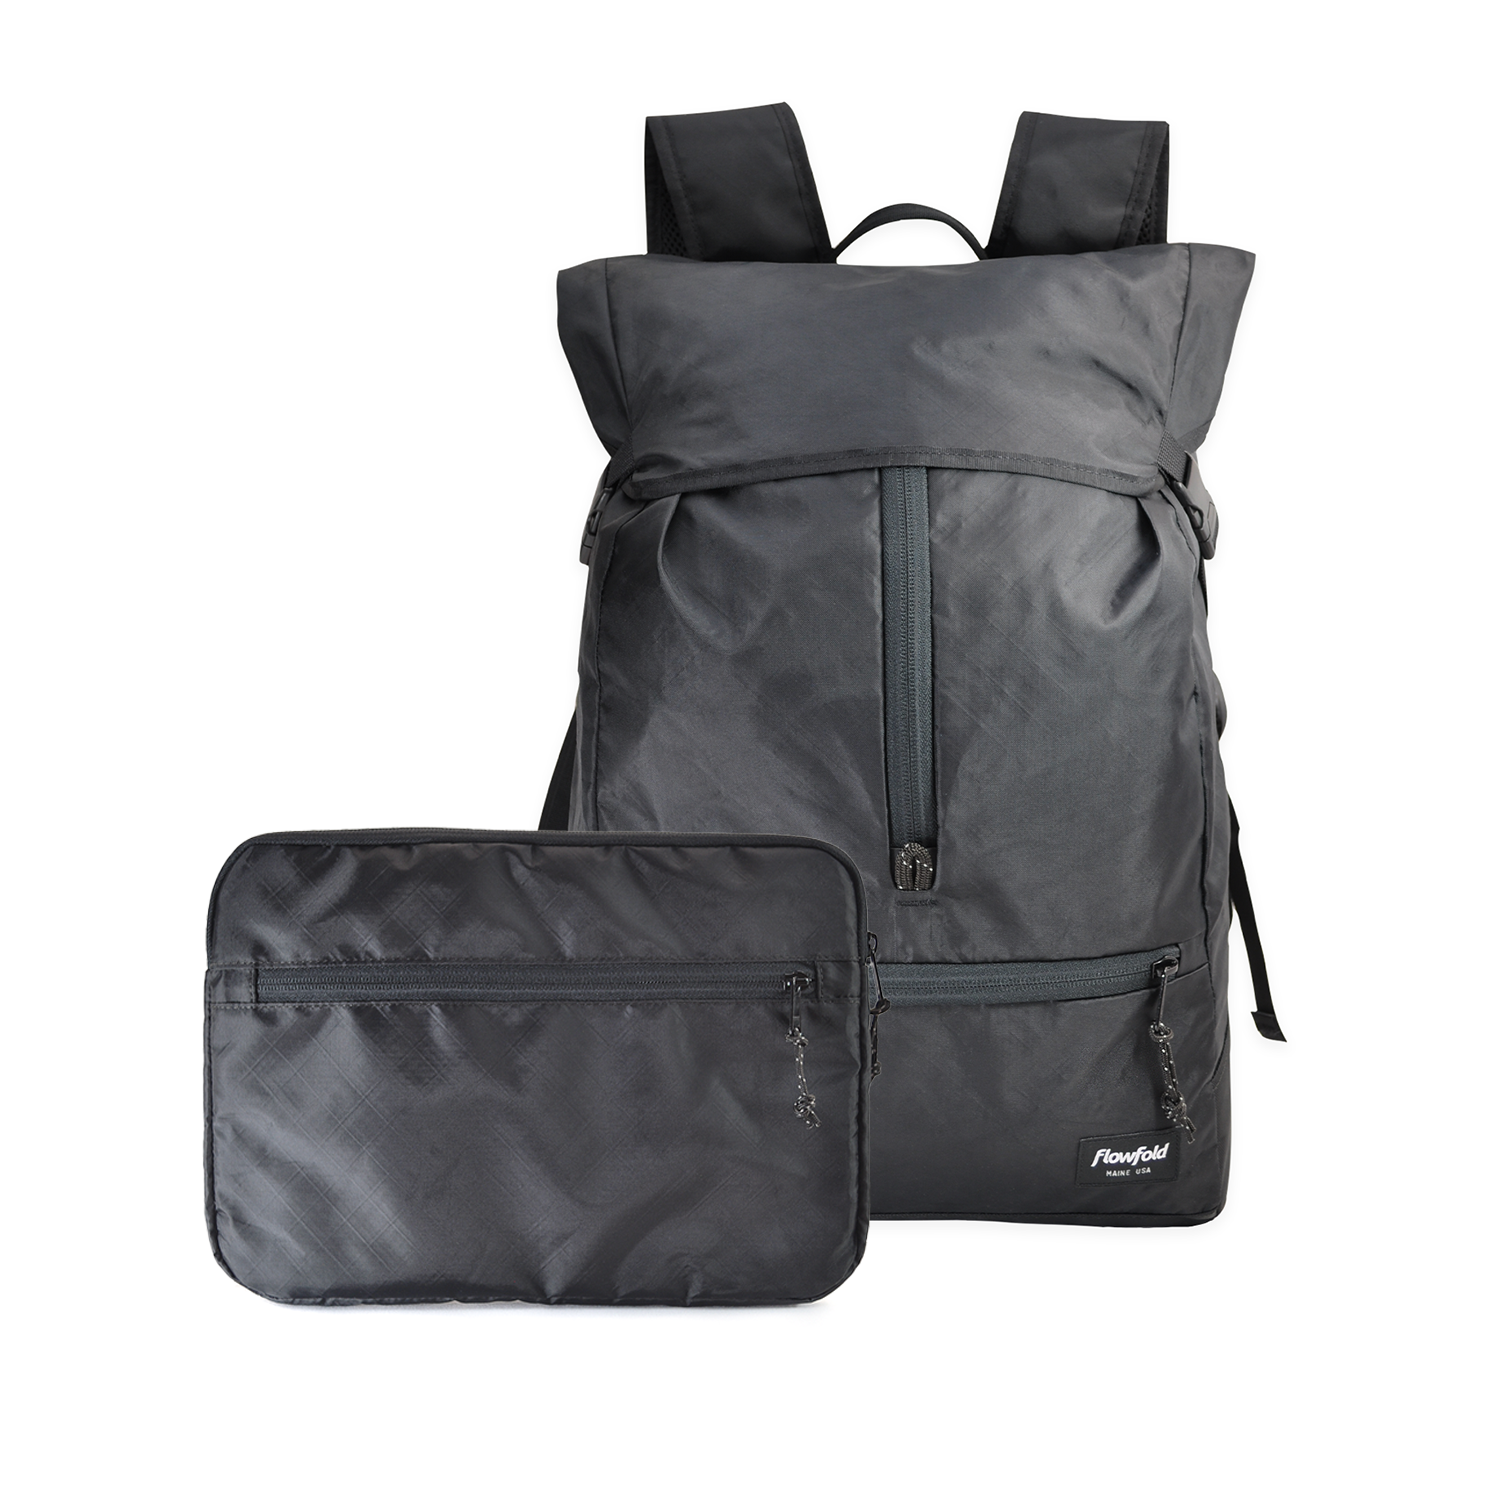 Rockland Kit: Commuter Backpack + Laptop Case for travel, commutes, and weather-resistant adventures - Recycled Jet Black